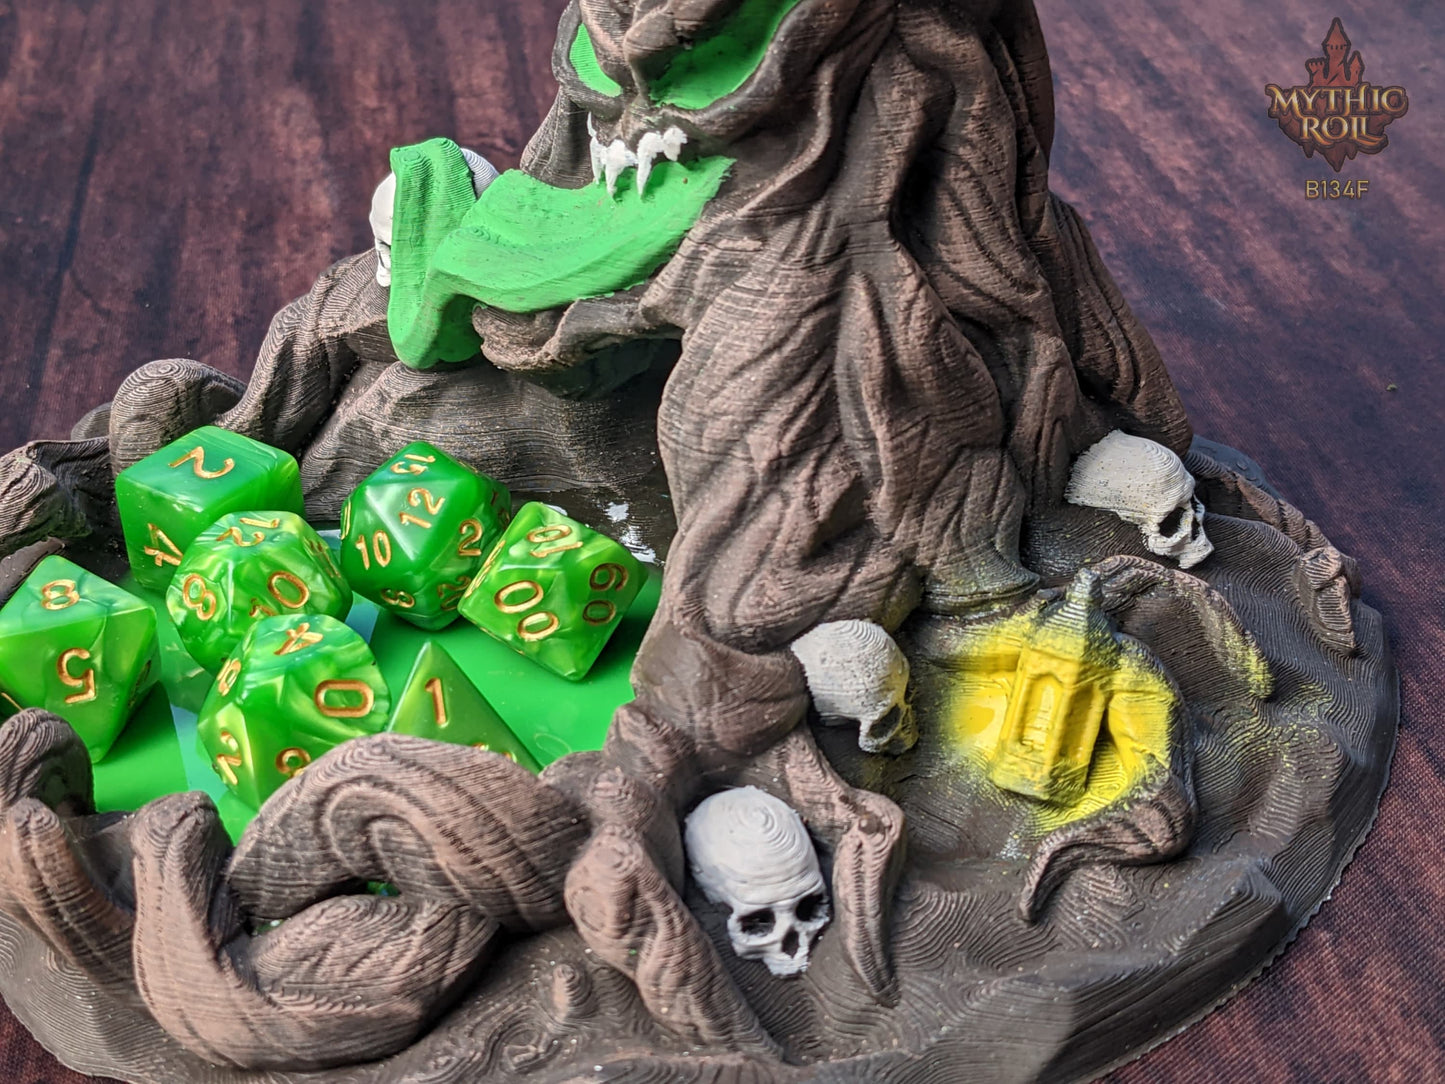 Terror Tree Mimic Dice Tower-Mythic Roll-Unchained Games